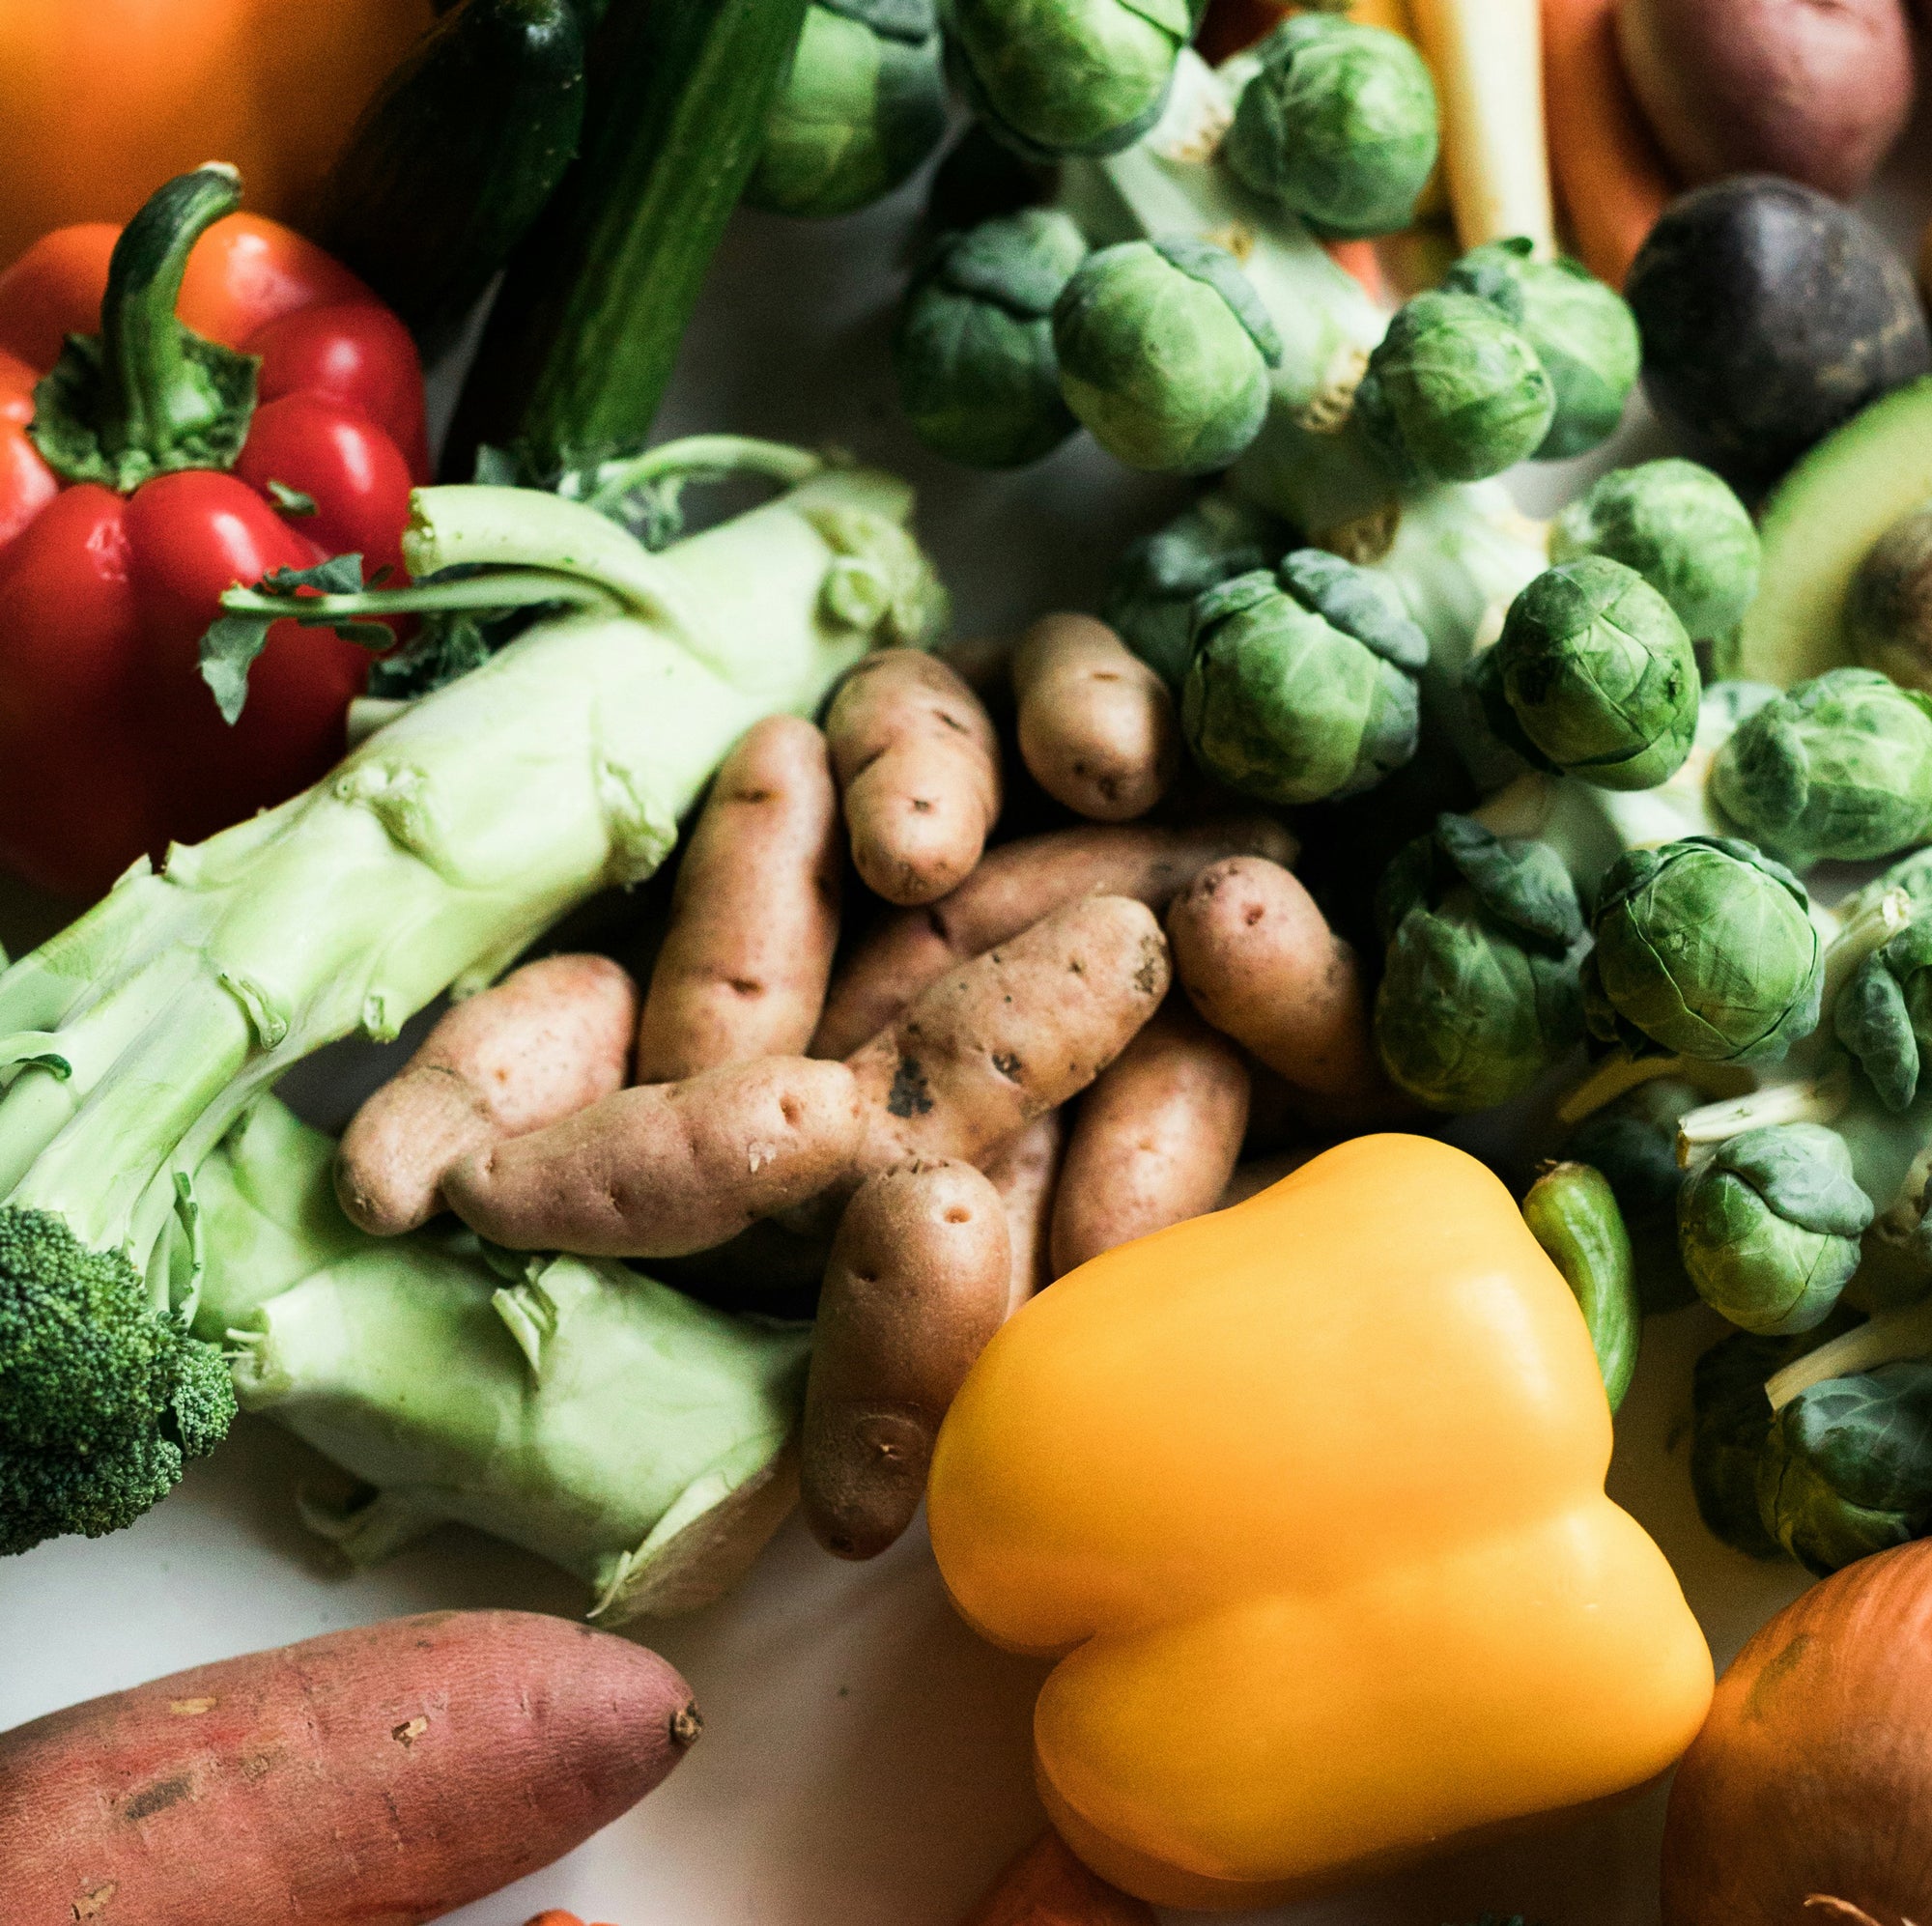 A variety of fresh vegetables are displayed, including yellow and red bell peppers, Brussels sprouts on a stalk, small potatoes, broccoli, cucumber, sweet potato, and some leafy greens. The vegetables are vibrant and arranged in a casual, overlapping manner.